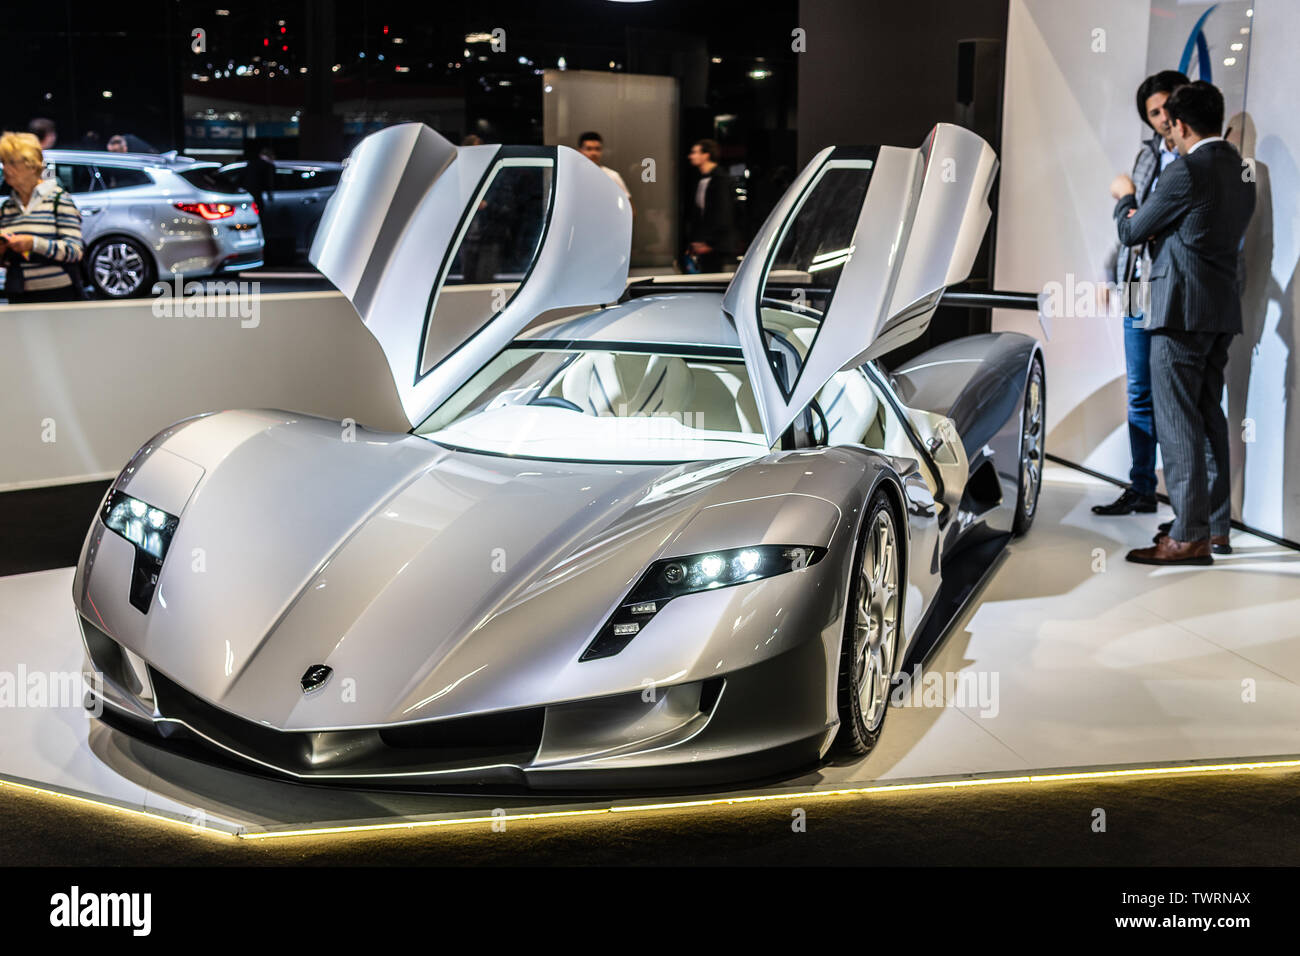 Paris, France, October 04, 2018: Aspark Owl at Mondial Paris Motor Show, all-electric battery-powered sports car manufactured by Japanese Aspark Stock Photo